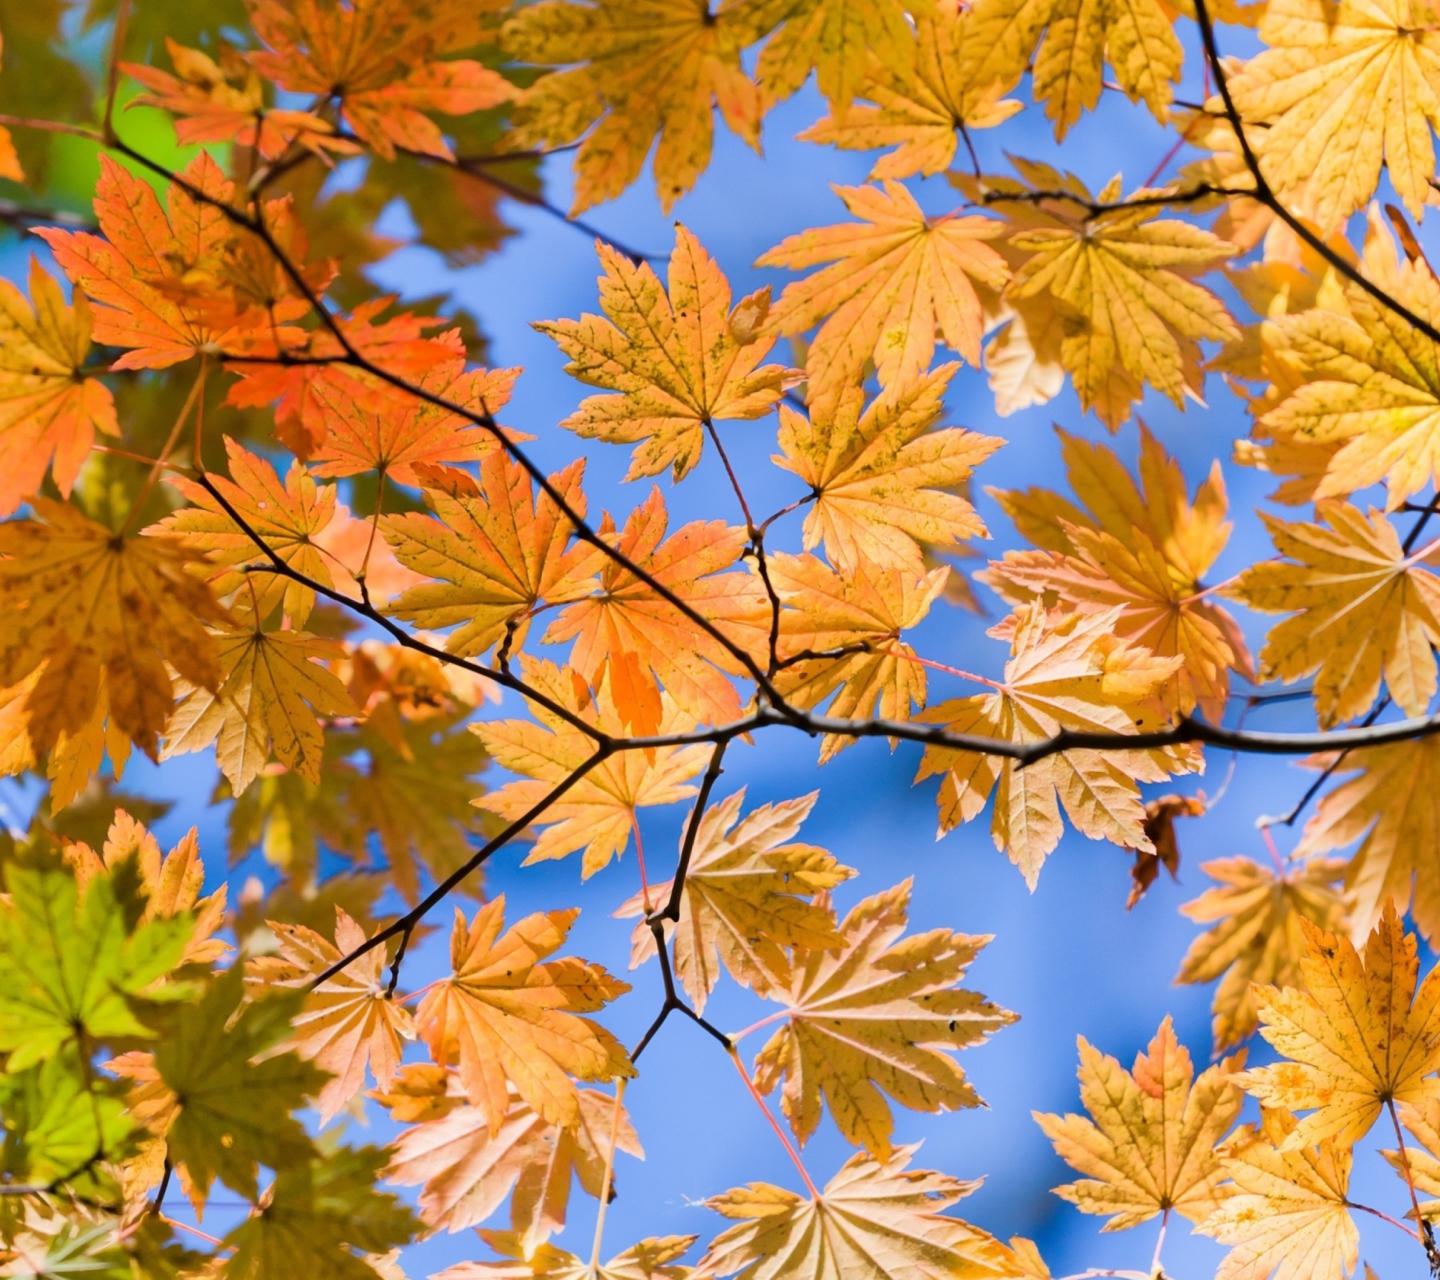 Autumn Leaves And Blue Sky wallpaper 1440x1280